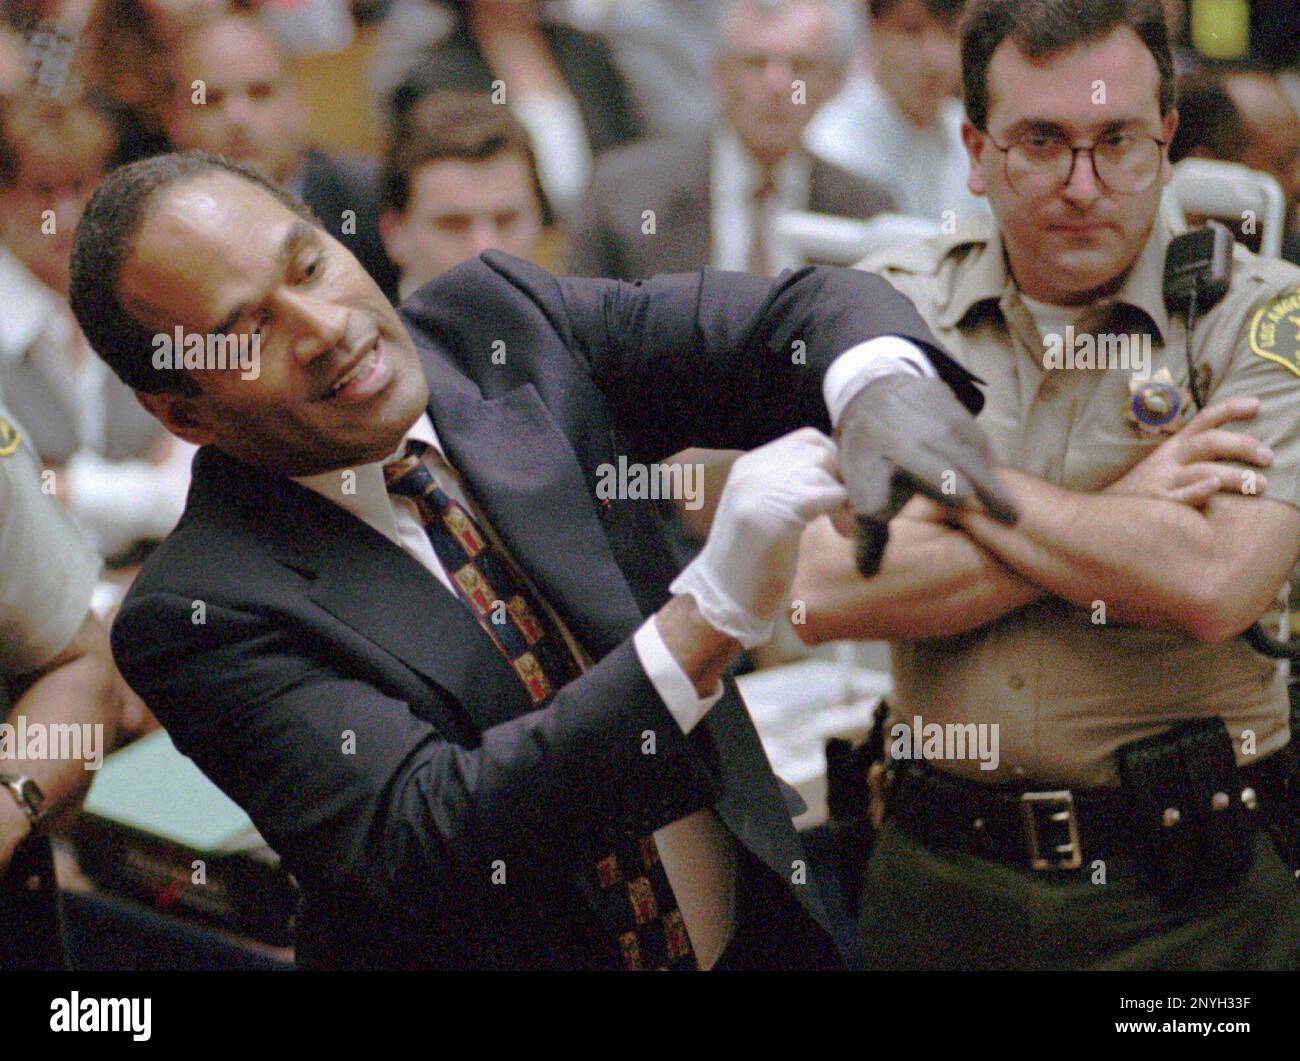 FILE - In this June 15, 1995 file photo, O.J. Simpson, left, grimaces as he tries on one of the leather gloves prosecutors say he wore the night his ex-wife Nicole Brown Simpson and Ron Goldman were murdered in a Los Angeles courtroom. Simpson, the former football star, TV pitchman and now Nevada prison inmate, will have a lot going for him when he appears before state parole board members Thursday, July 20, 2017, seeking his release after more than eight years for an ill-fated bid to retrieve sports memorabilia. (AP Photo/Sam Mircovich, Pool, file) Stock Photo